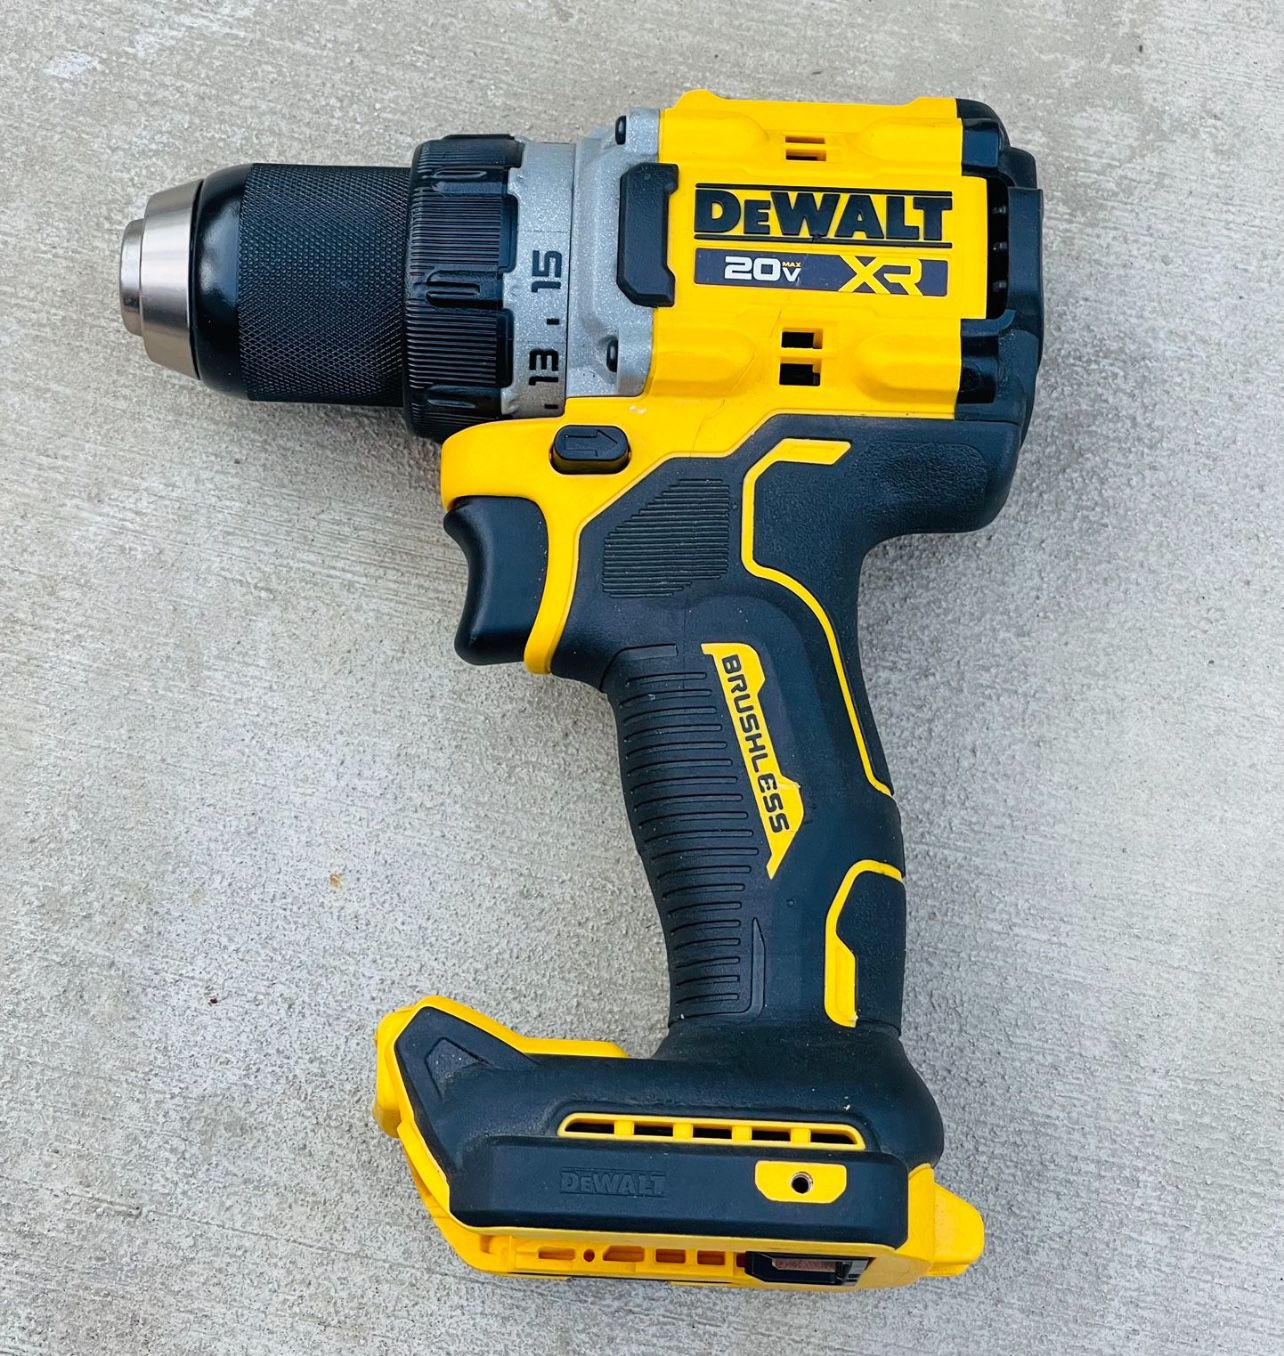 DEWALT 20V MAX XR Cordless Compact 1/2 in. Drill/Driver (Tool Only)